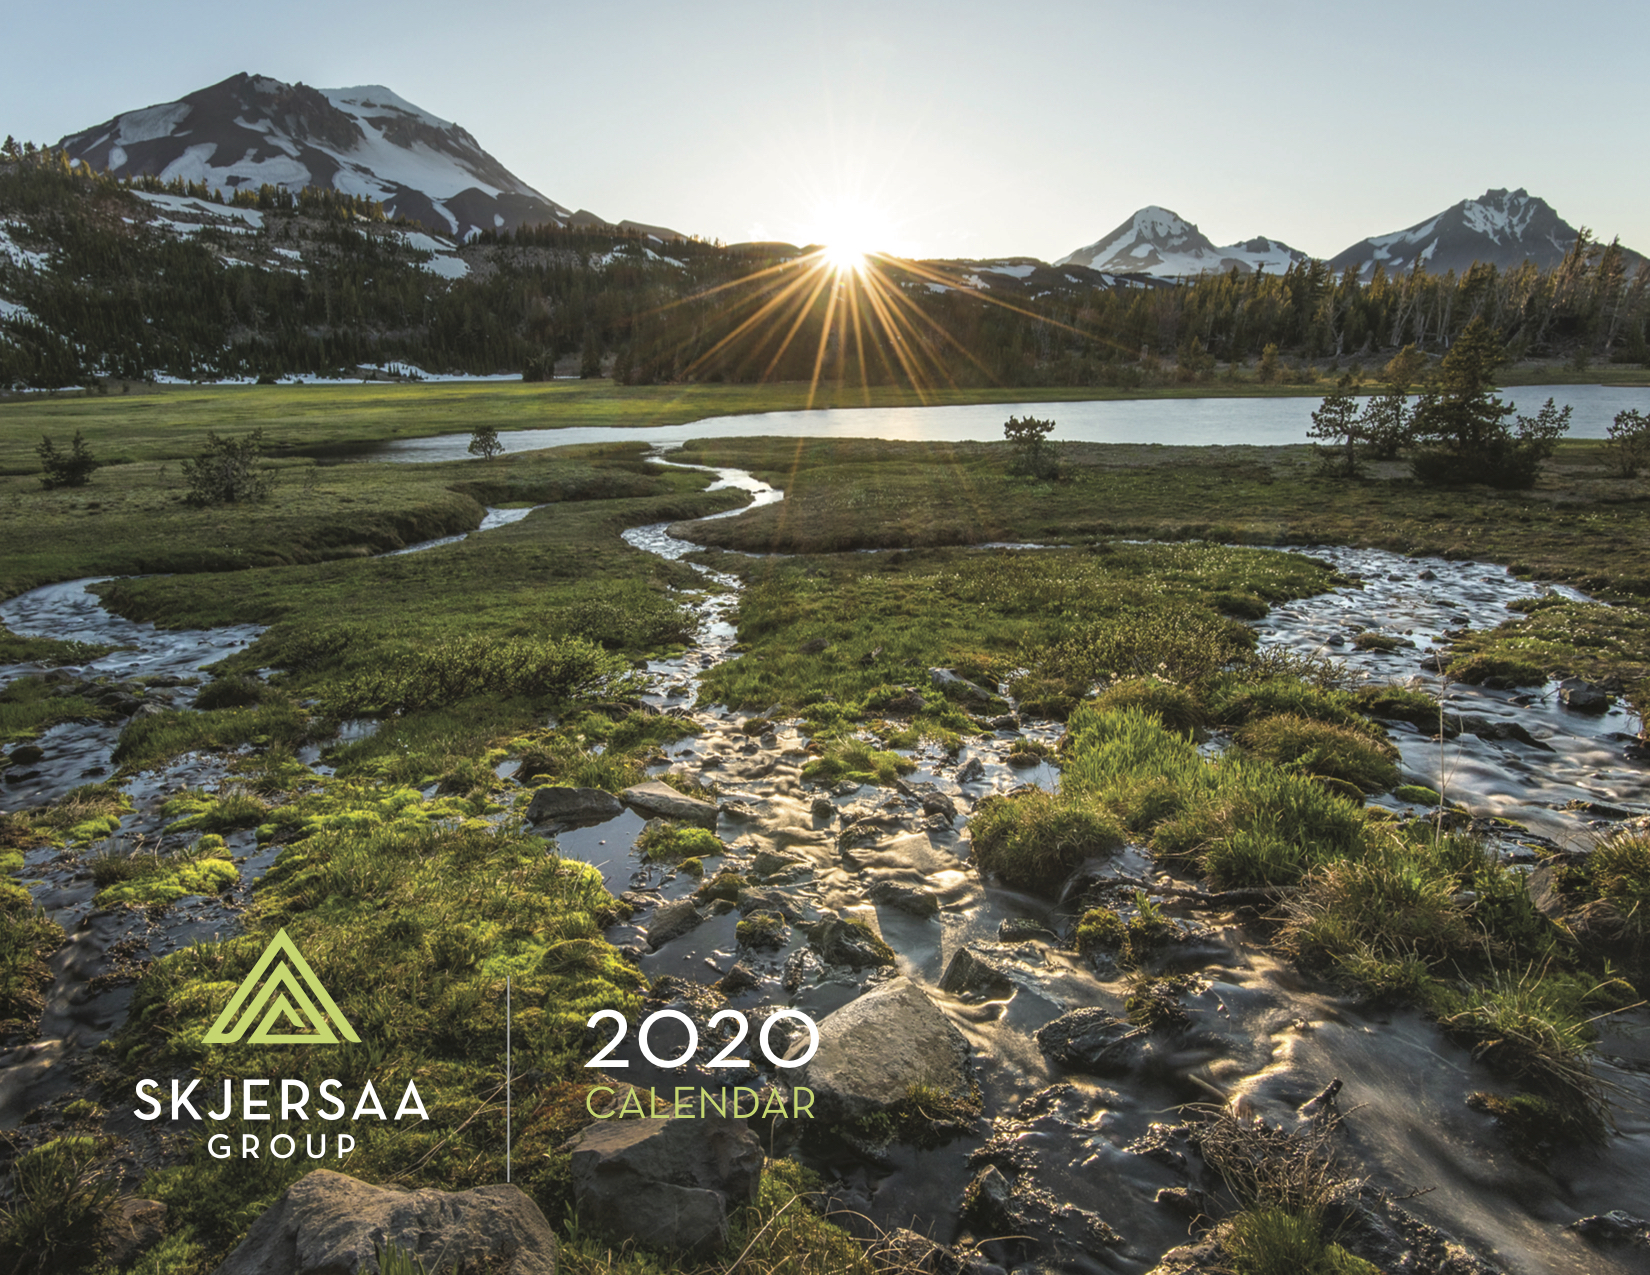 Cover of the 2020 Skjersaa Group annual print calendar featuring landscape photo of the Three Sisters peaks